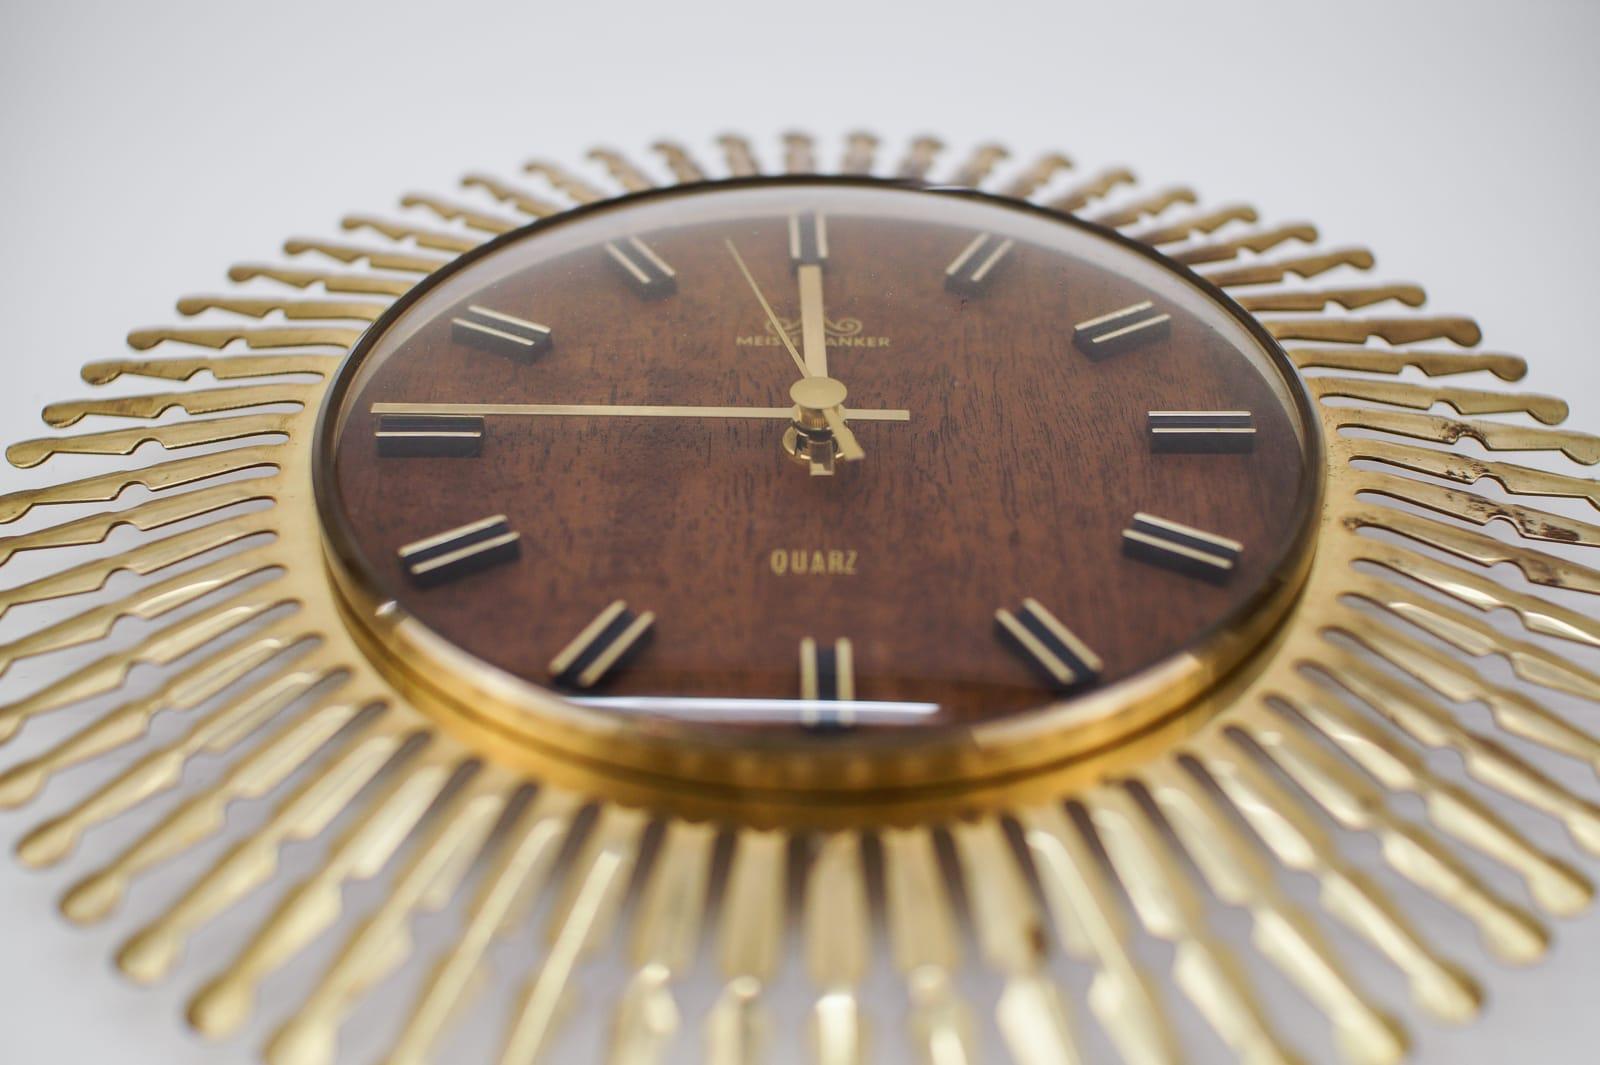 Mid-Century Modern Sunburst Wall Clock by Meister Anker in Brass, 1960s Germany In Good Condition For Sale In Nürnberg, Bayern